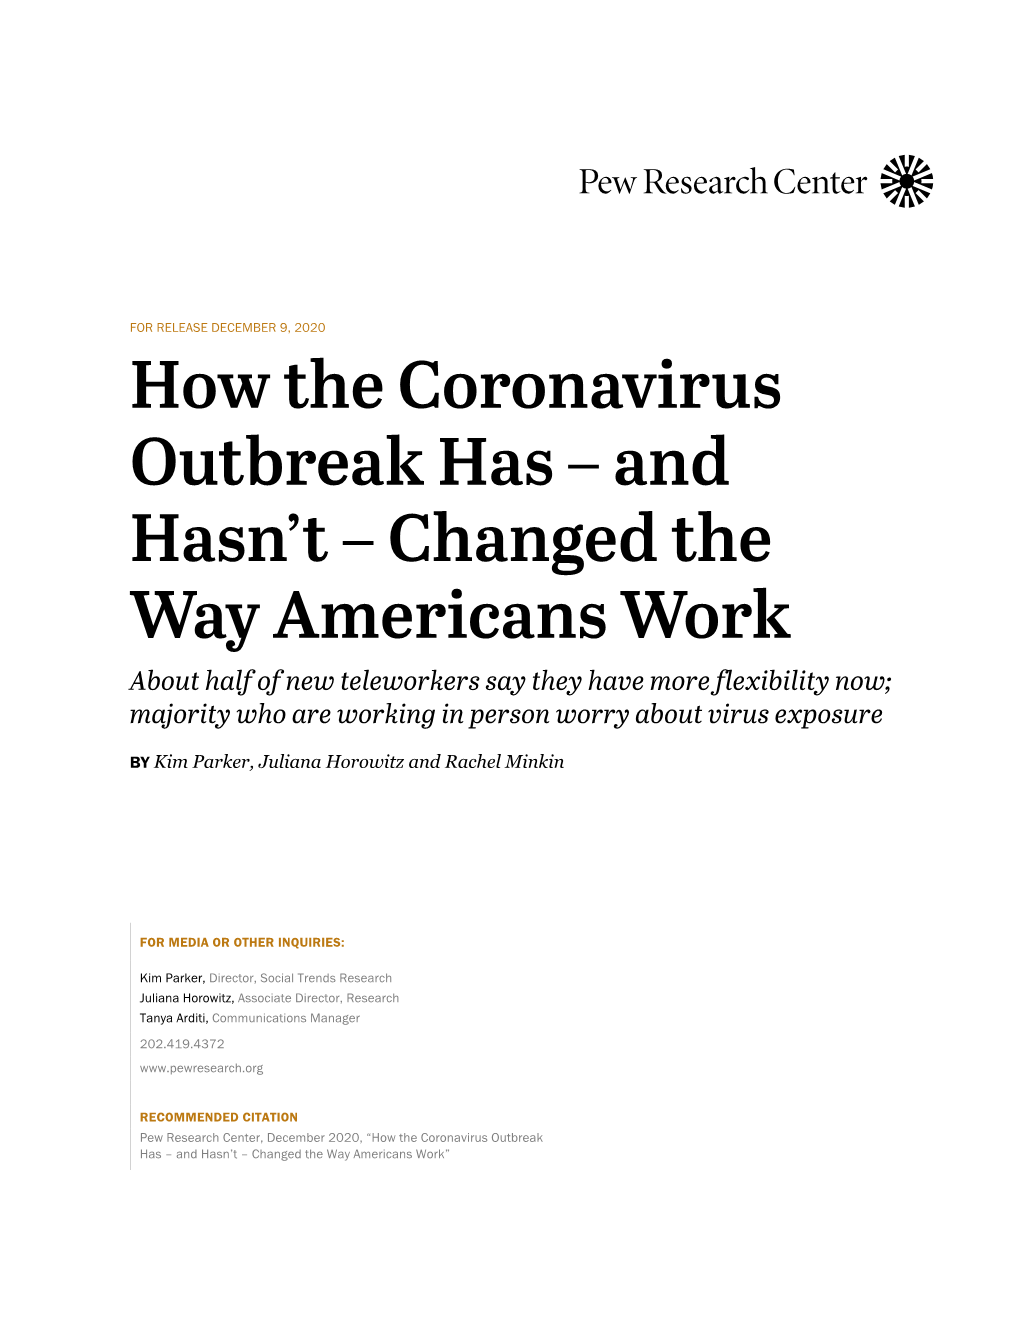 How the Coronavirus Outbreak Has – and Hasn't – Changed the Way